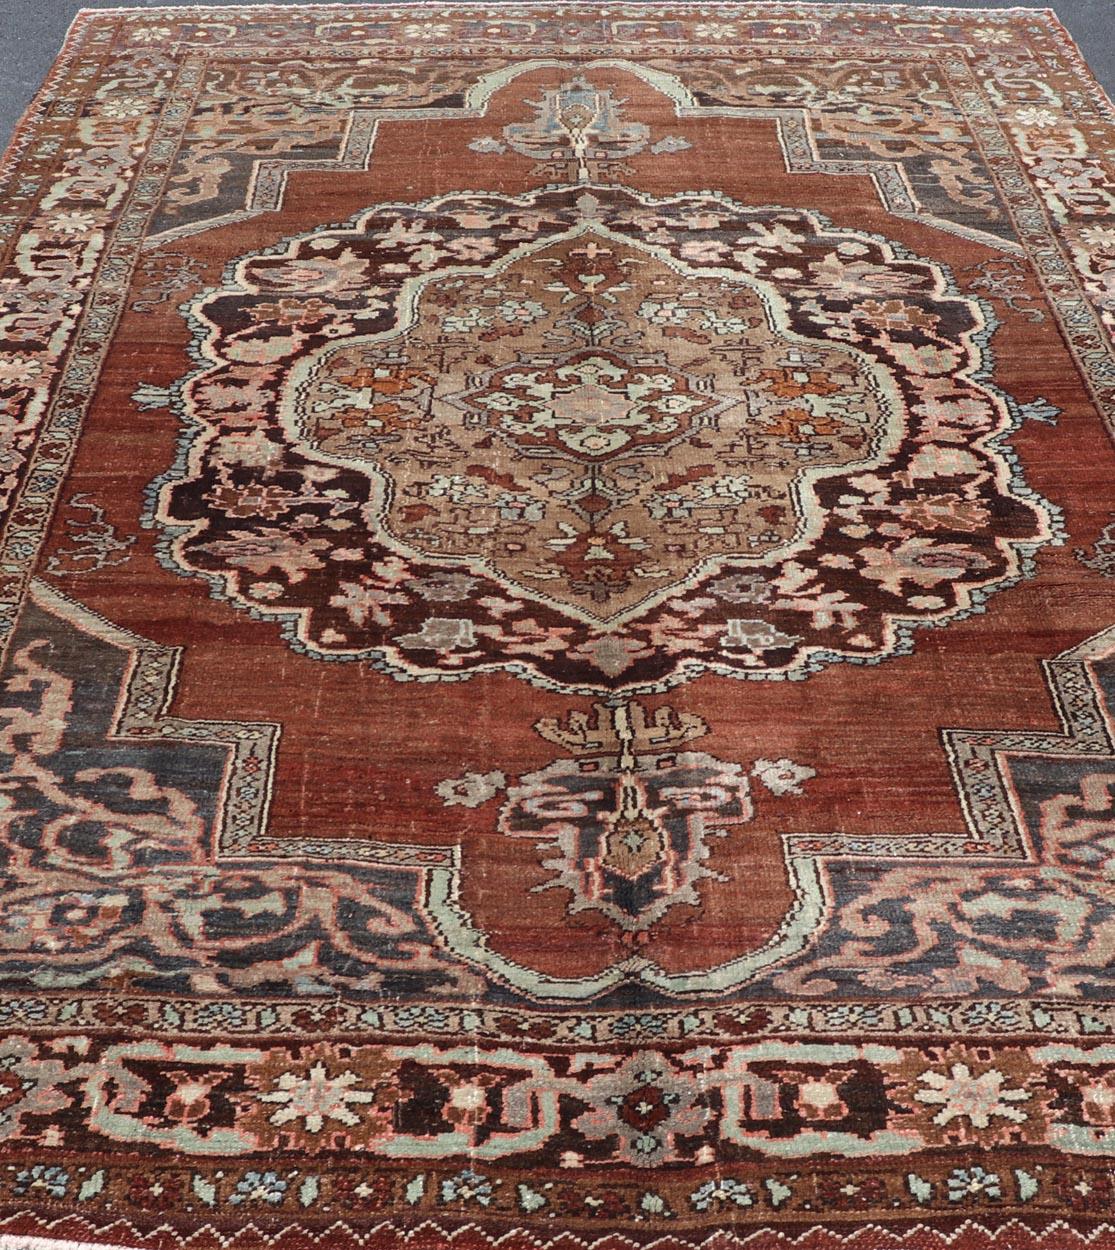 20th Century Turkish Kars Rug with Floral Medallion Design in Brown and Earthy Tones  For Sale